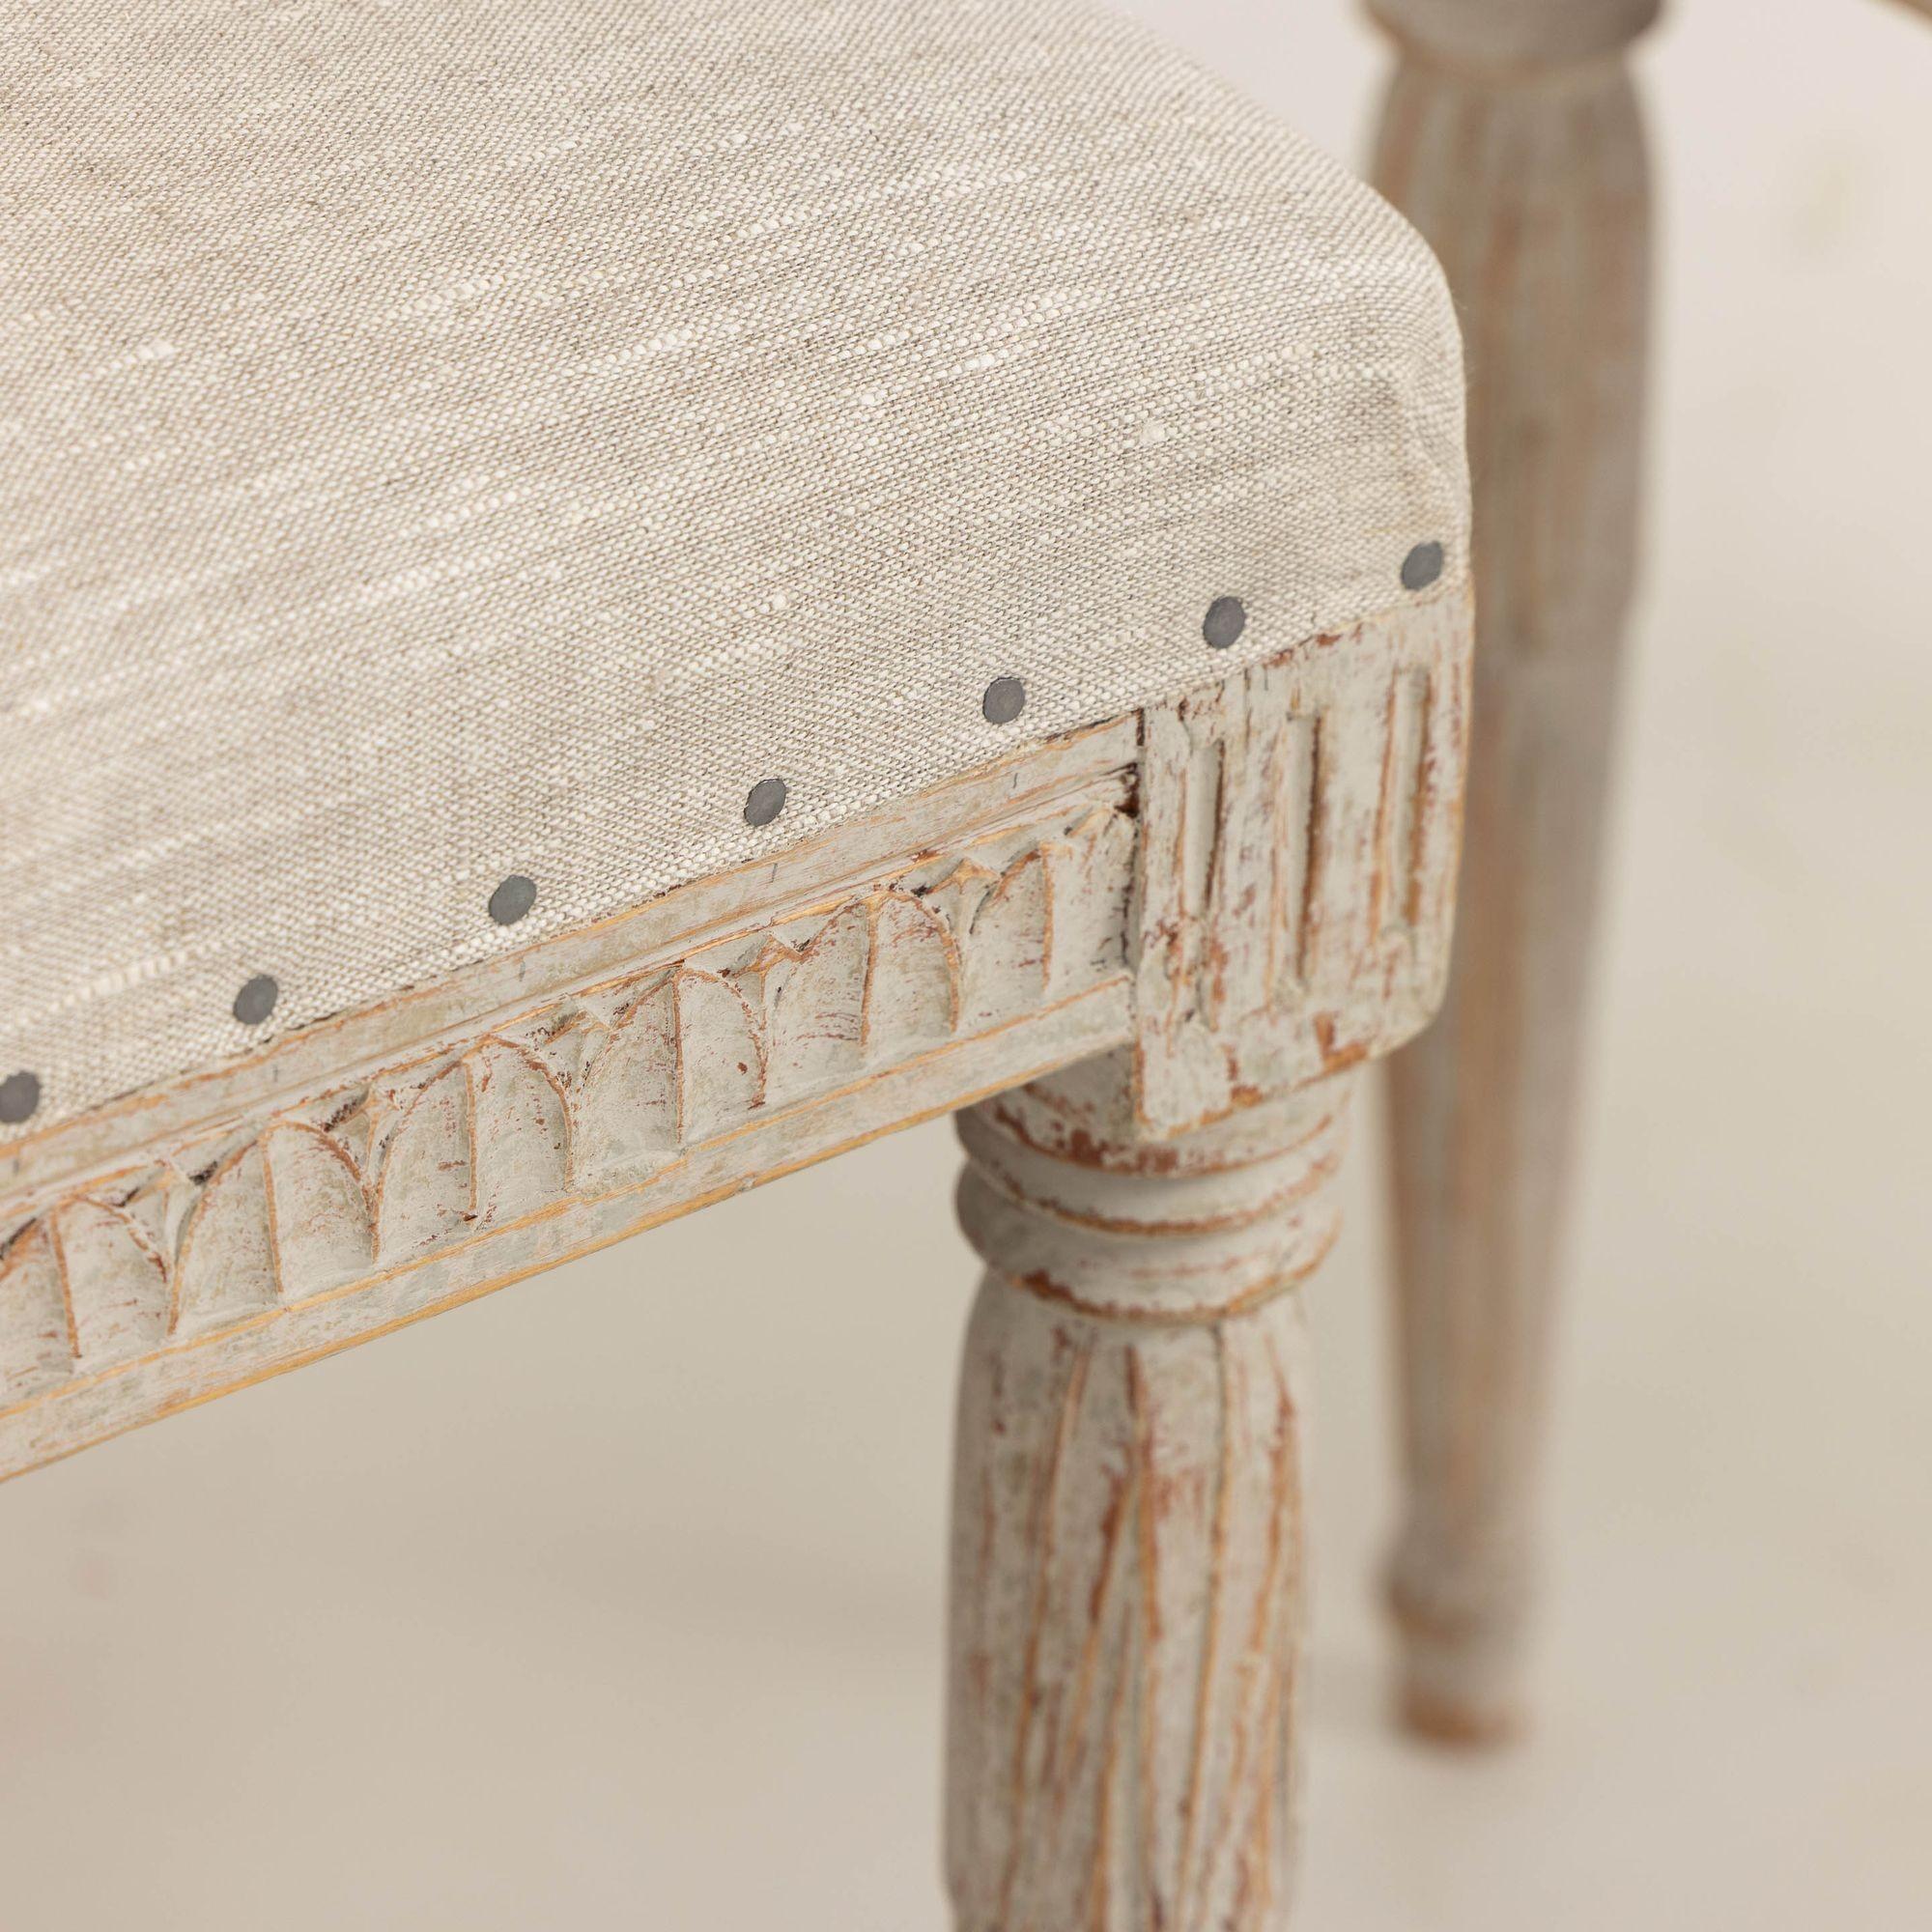 19th Century 19th c . Swedish Gustavian Painted Stools Signed by Johannes Ericsson For Sale